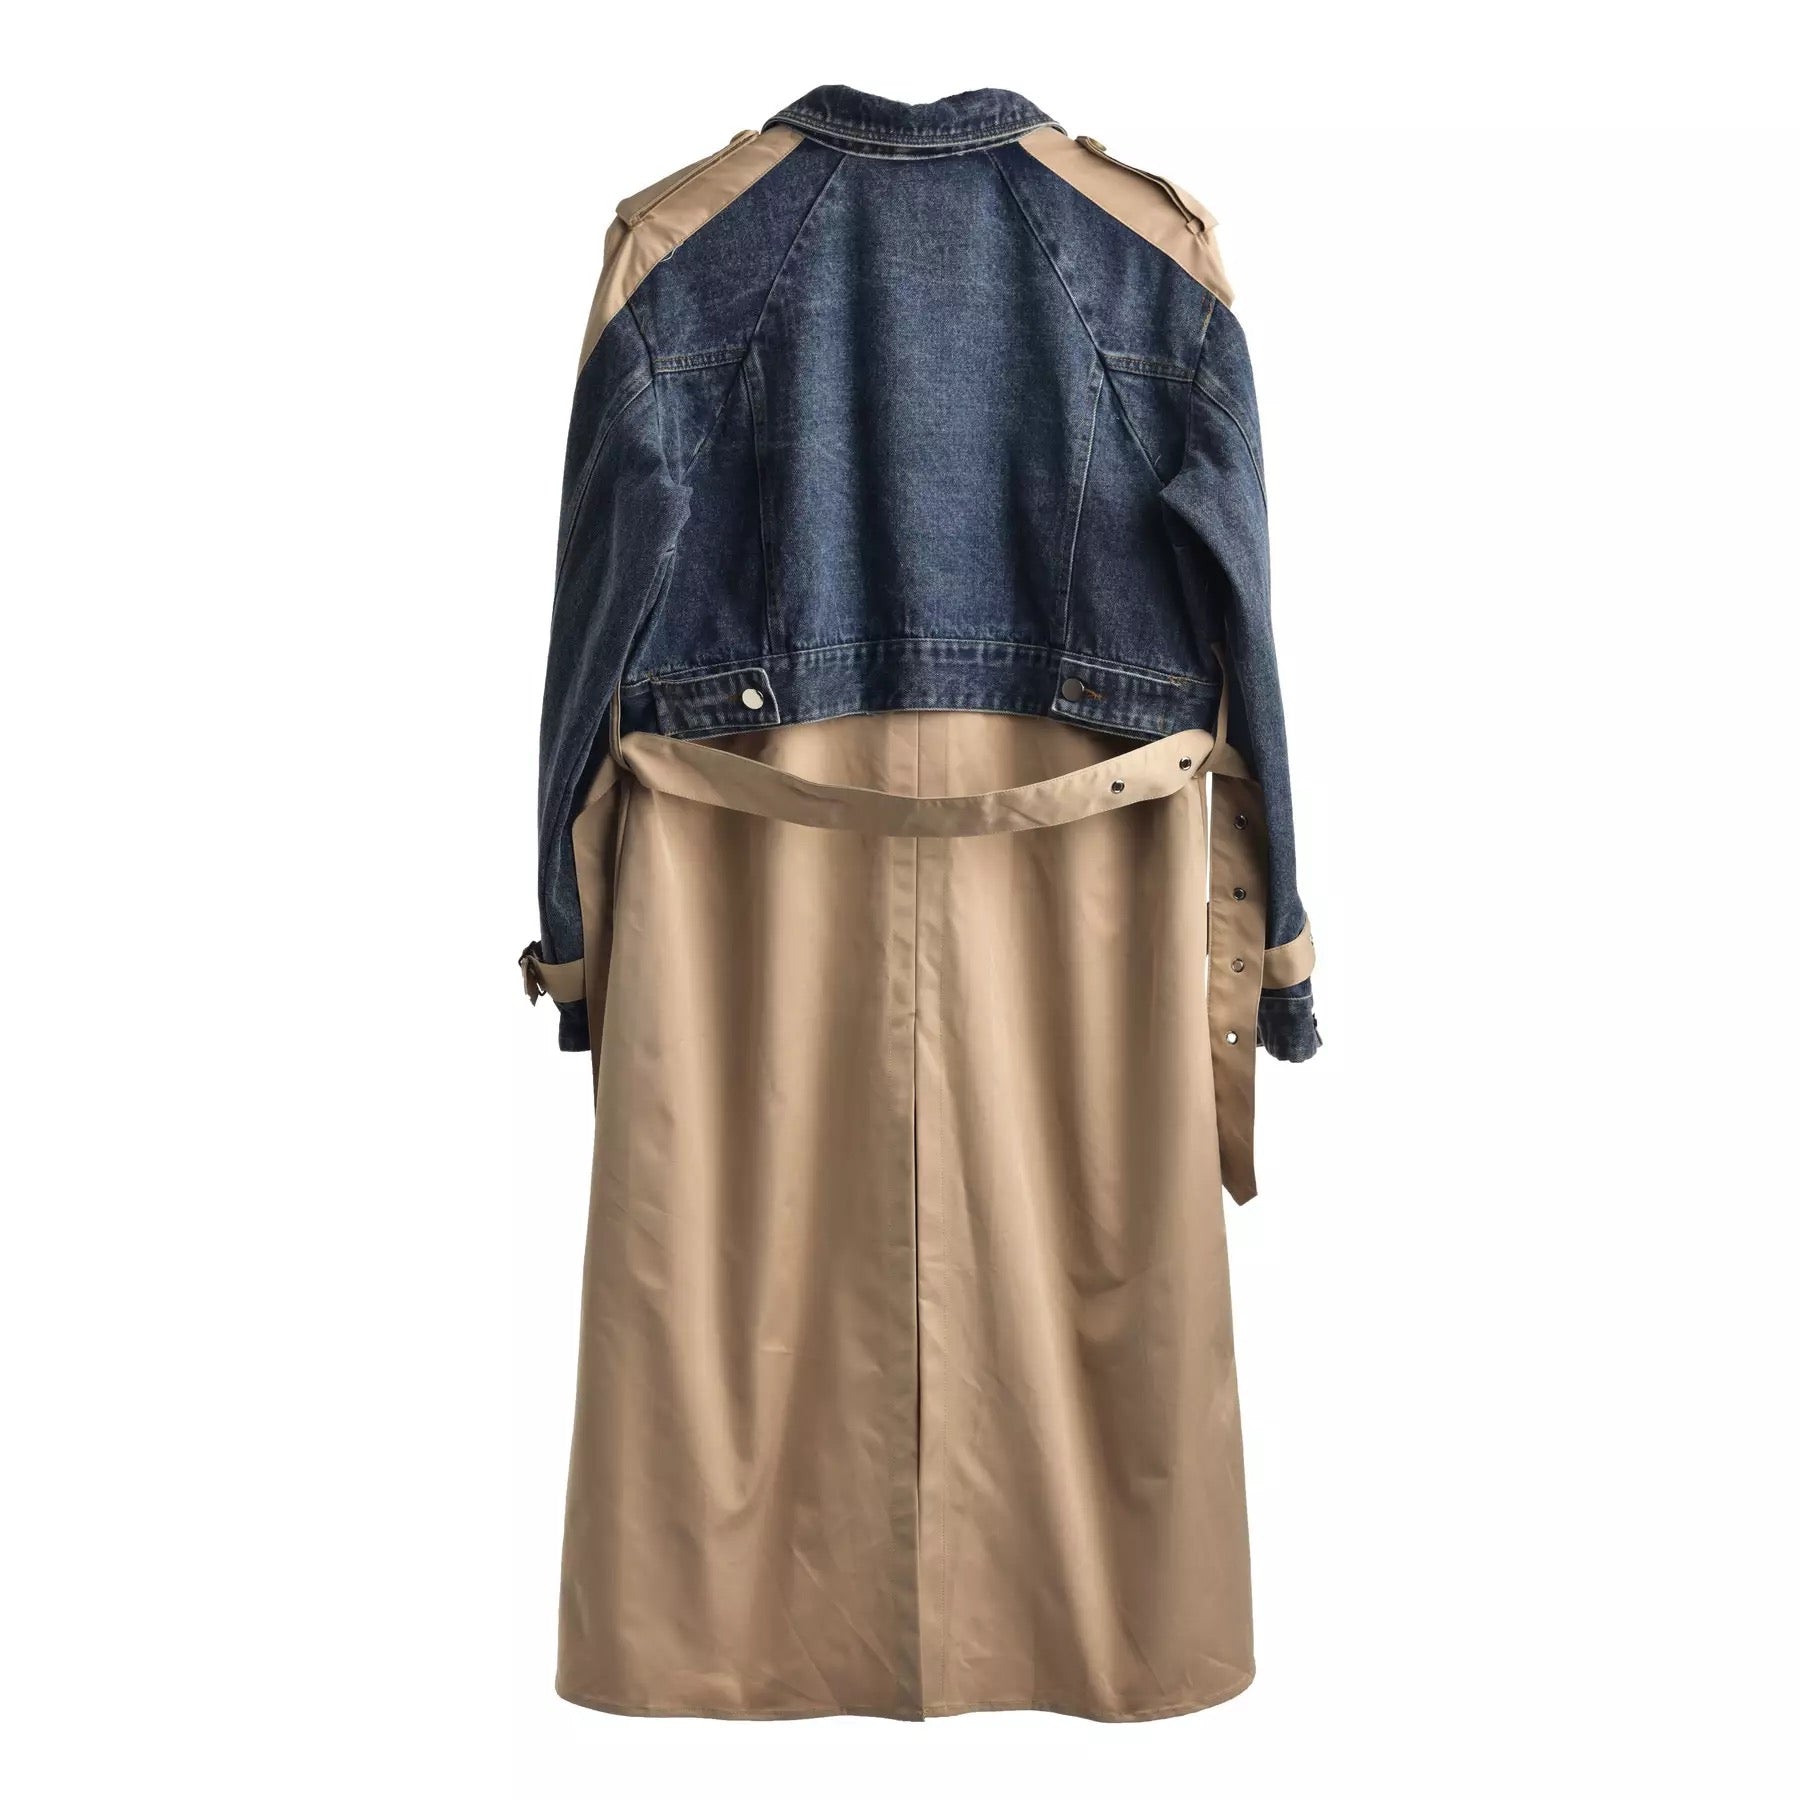 GOLDxTEAL Why Not Denim Trench Coat. Stylish trench coat with patchwork denim.